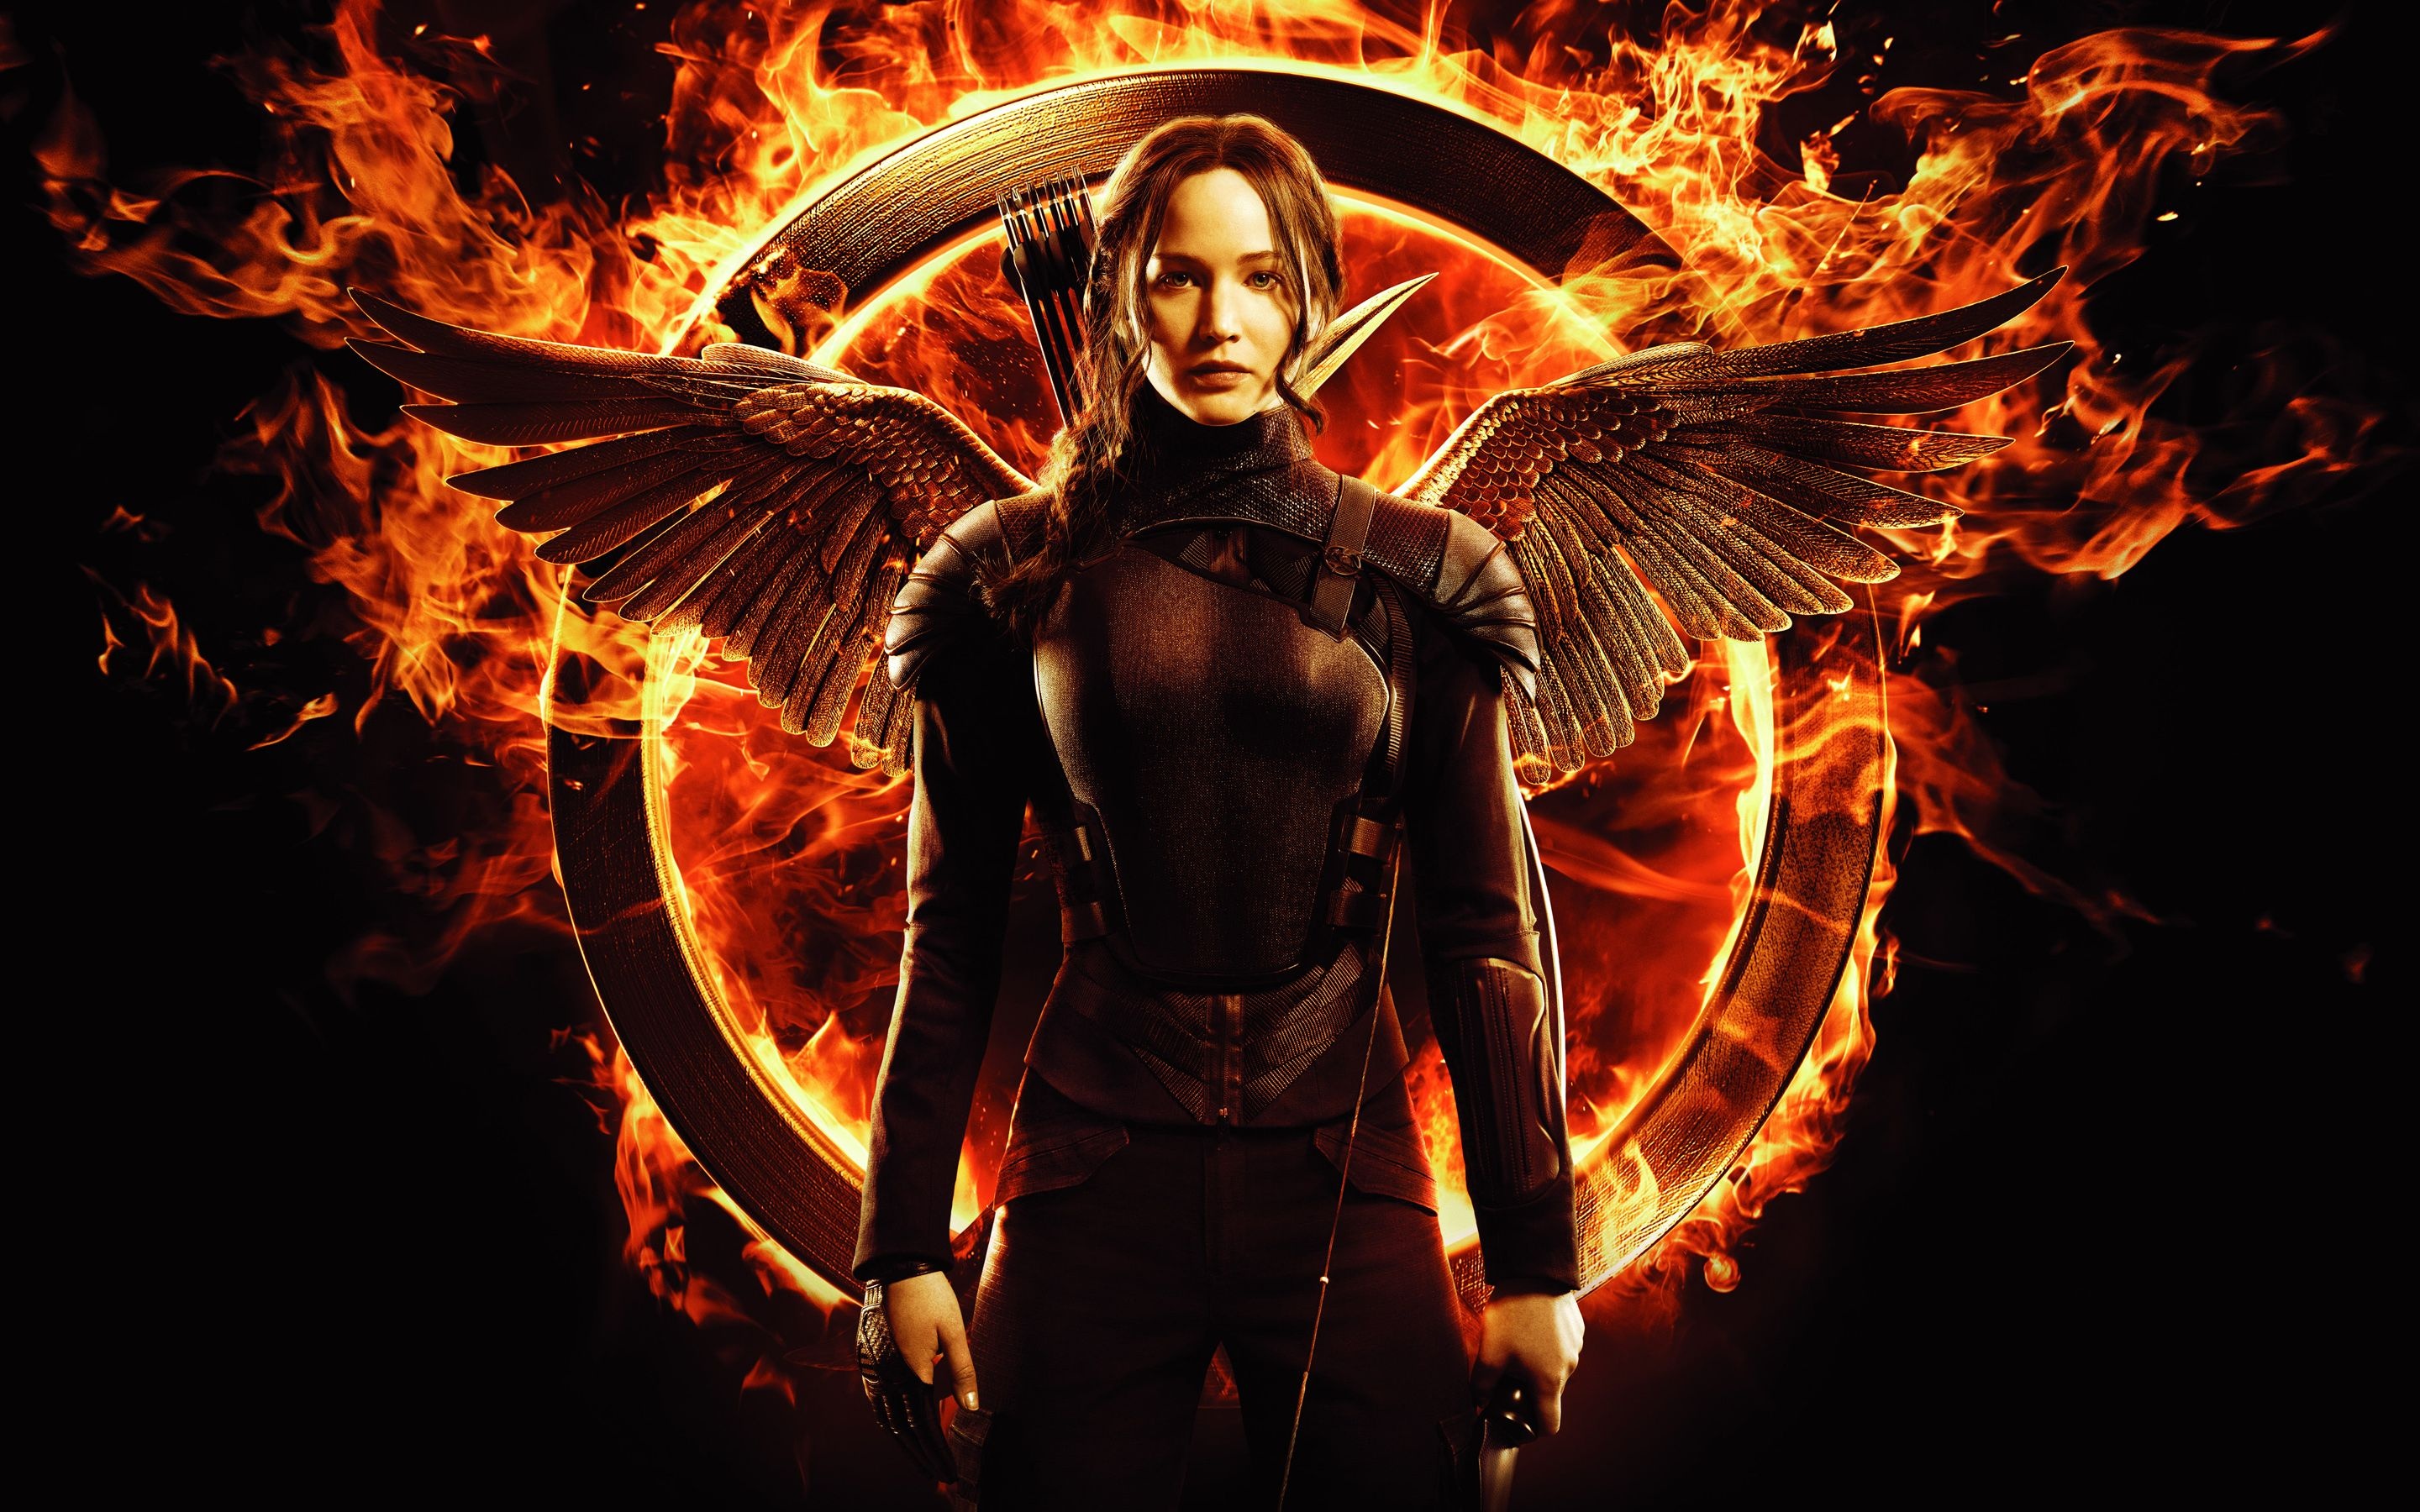 Hunger Games: Katniss Everdeen, portrayed by Jennifer Lawrence in the film adaptations. 2880x1800 HD Background.